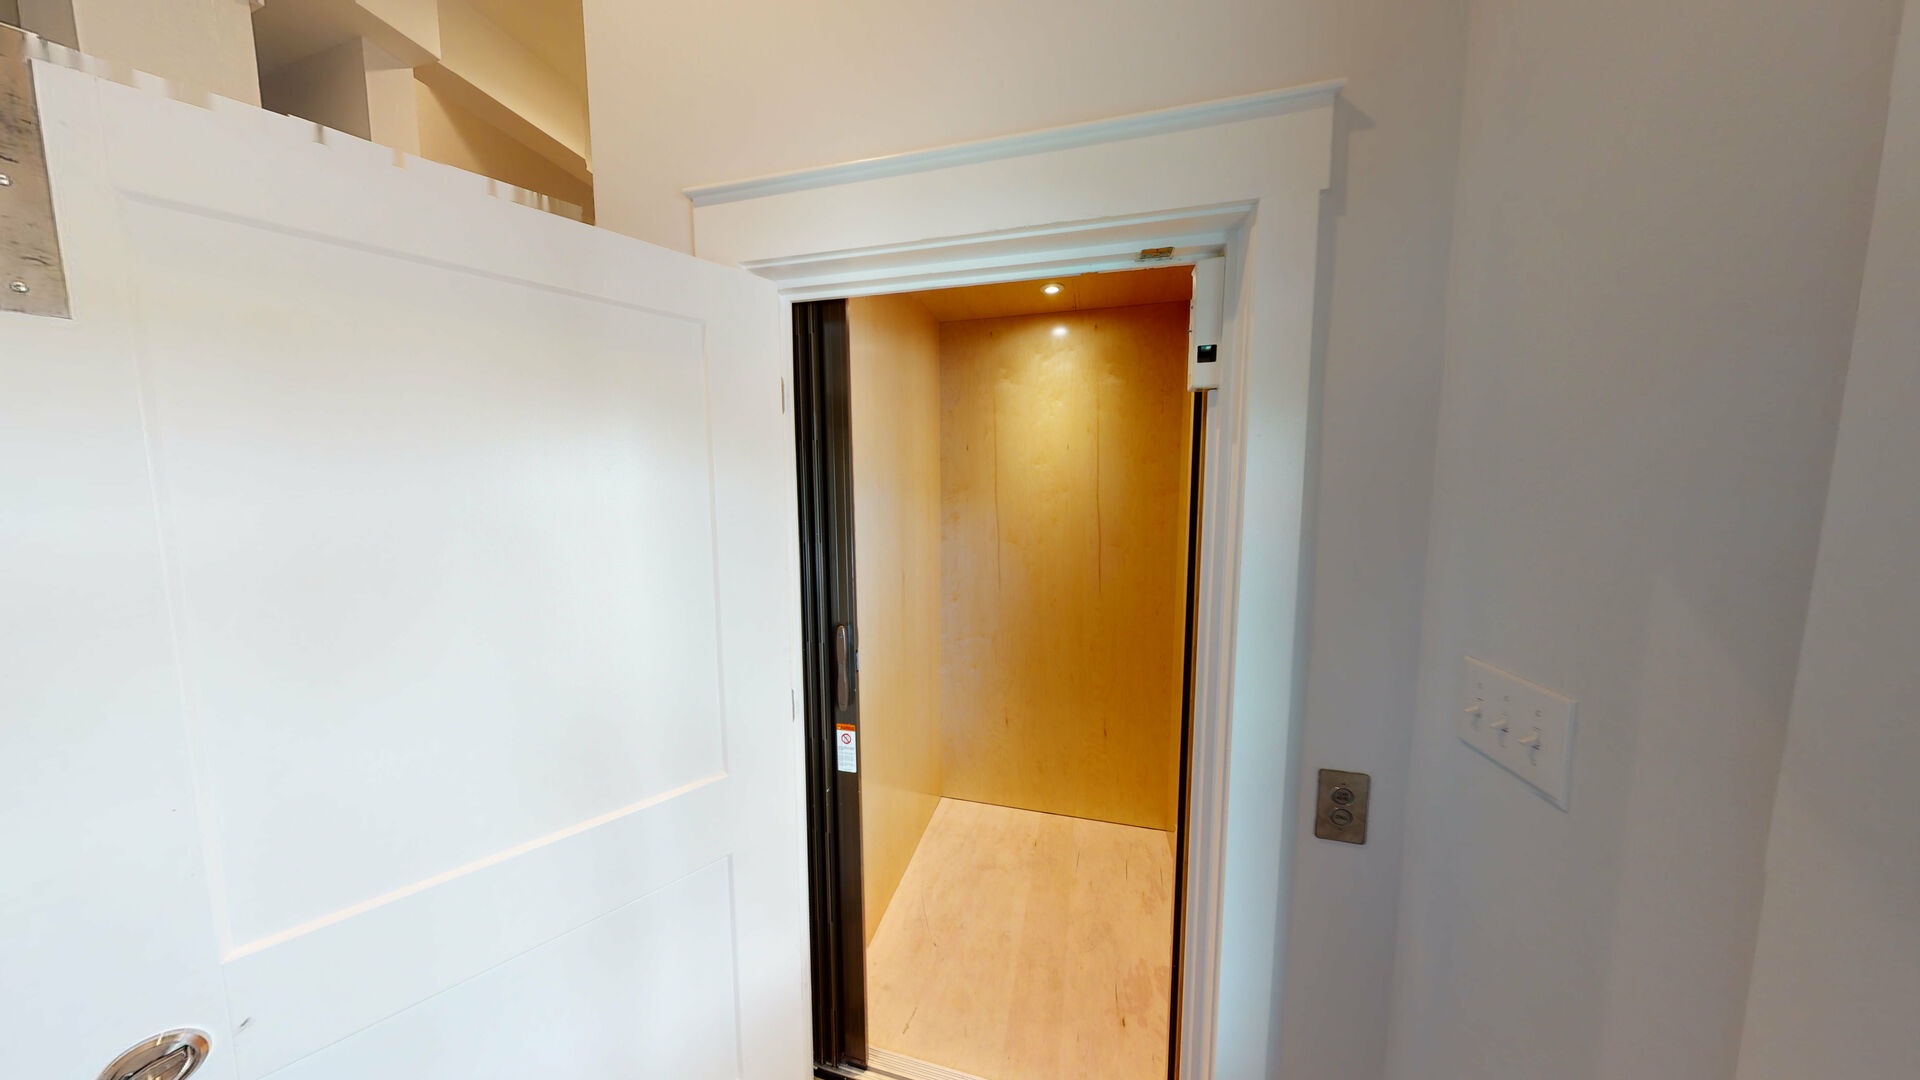 Entry (ground) level elevator access to all floors